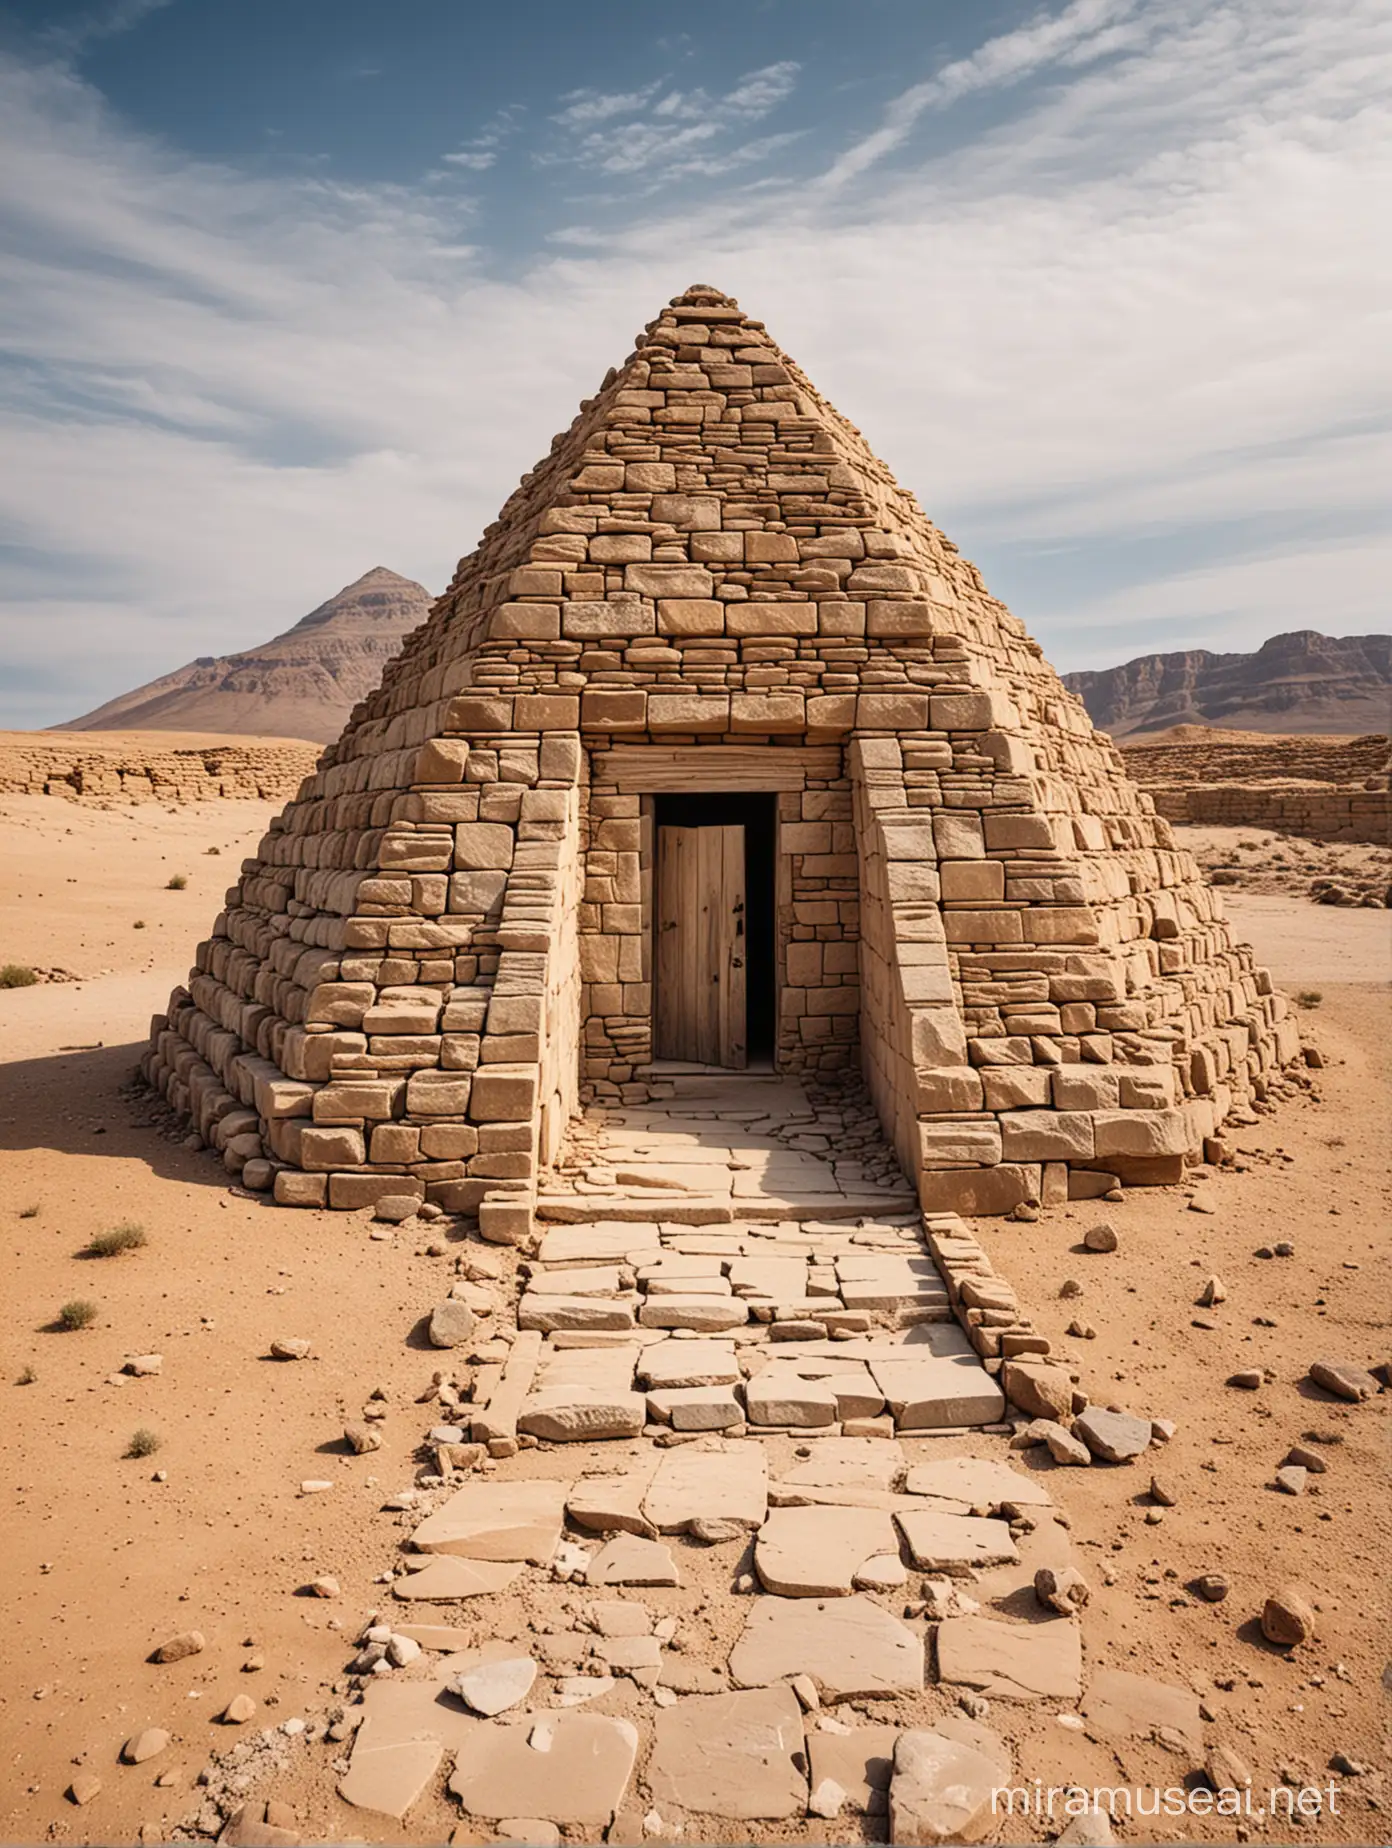 Stone pyramid with a stone entrance in the desert